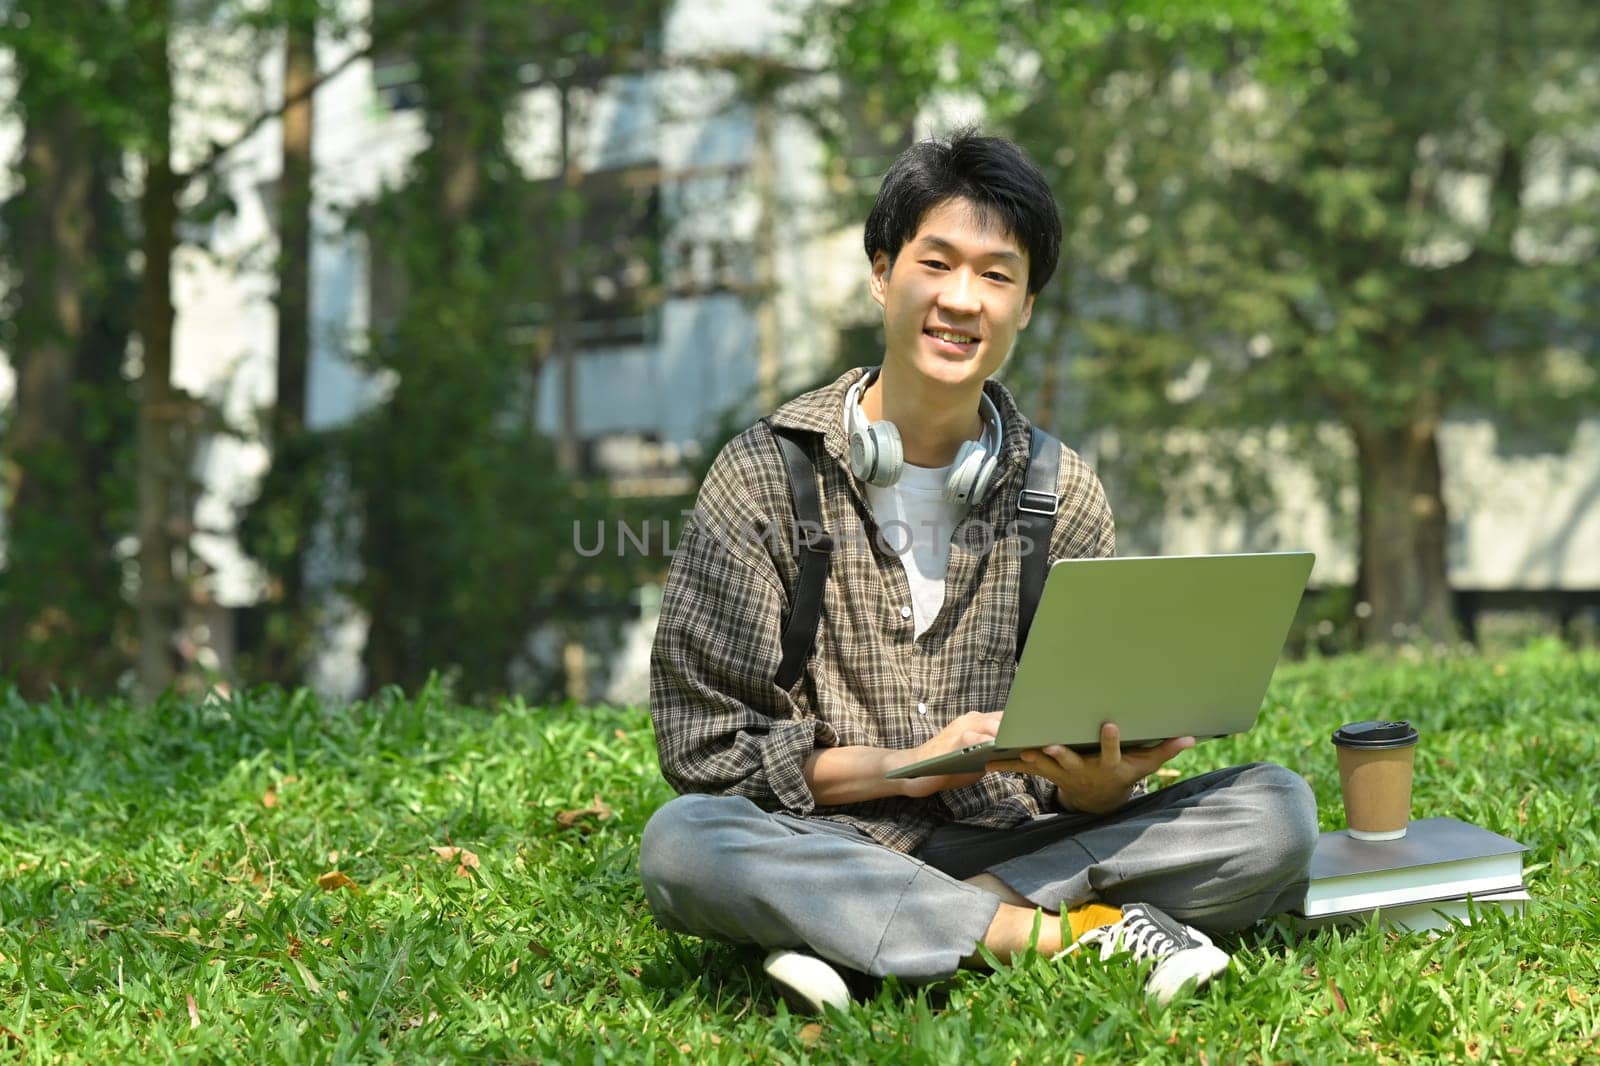 Smiling asian man student using laptop on green grass in front of university building. Education, technology and lifestyle concept.